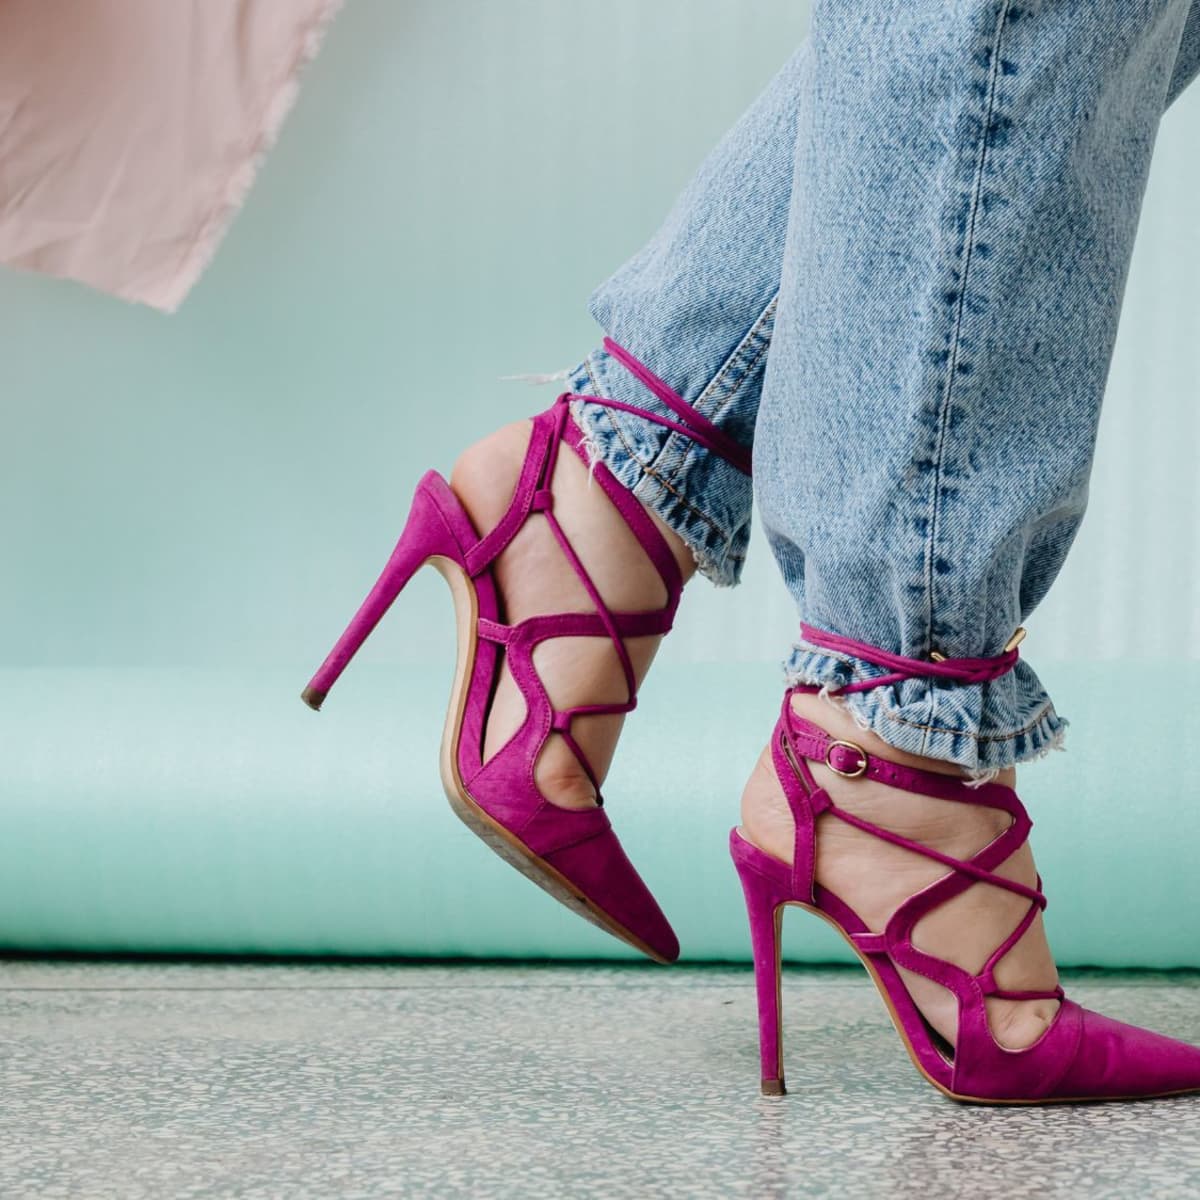 350+ High Heels Pictures [HQ] | Download Free Images on Unsplash